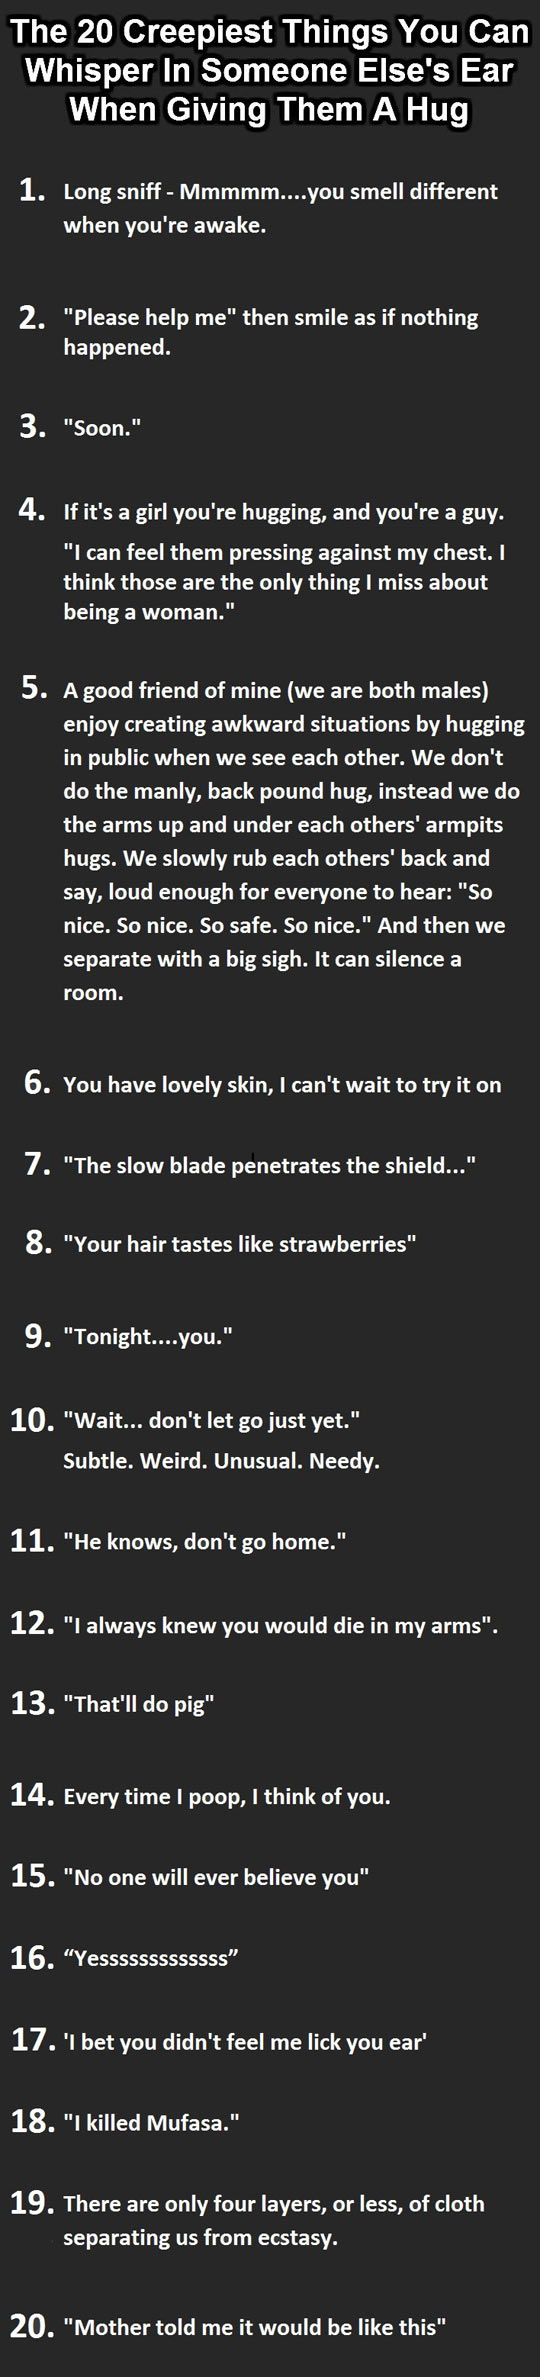 Creepiest Things You Can Whisper In Someone